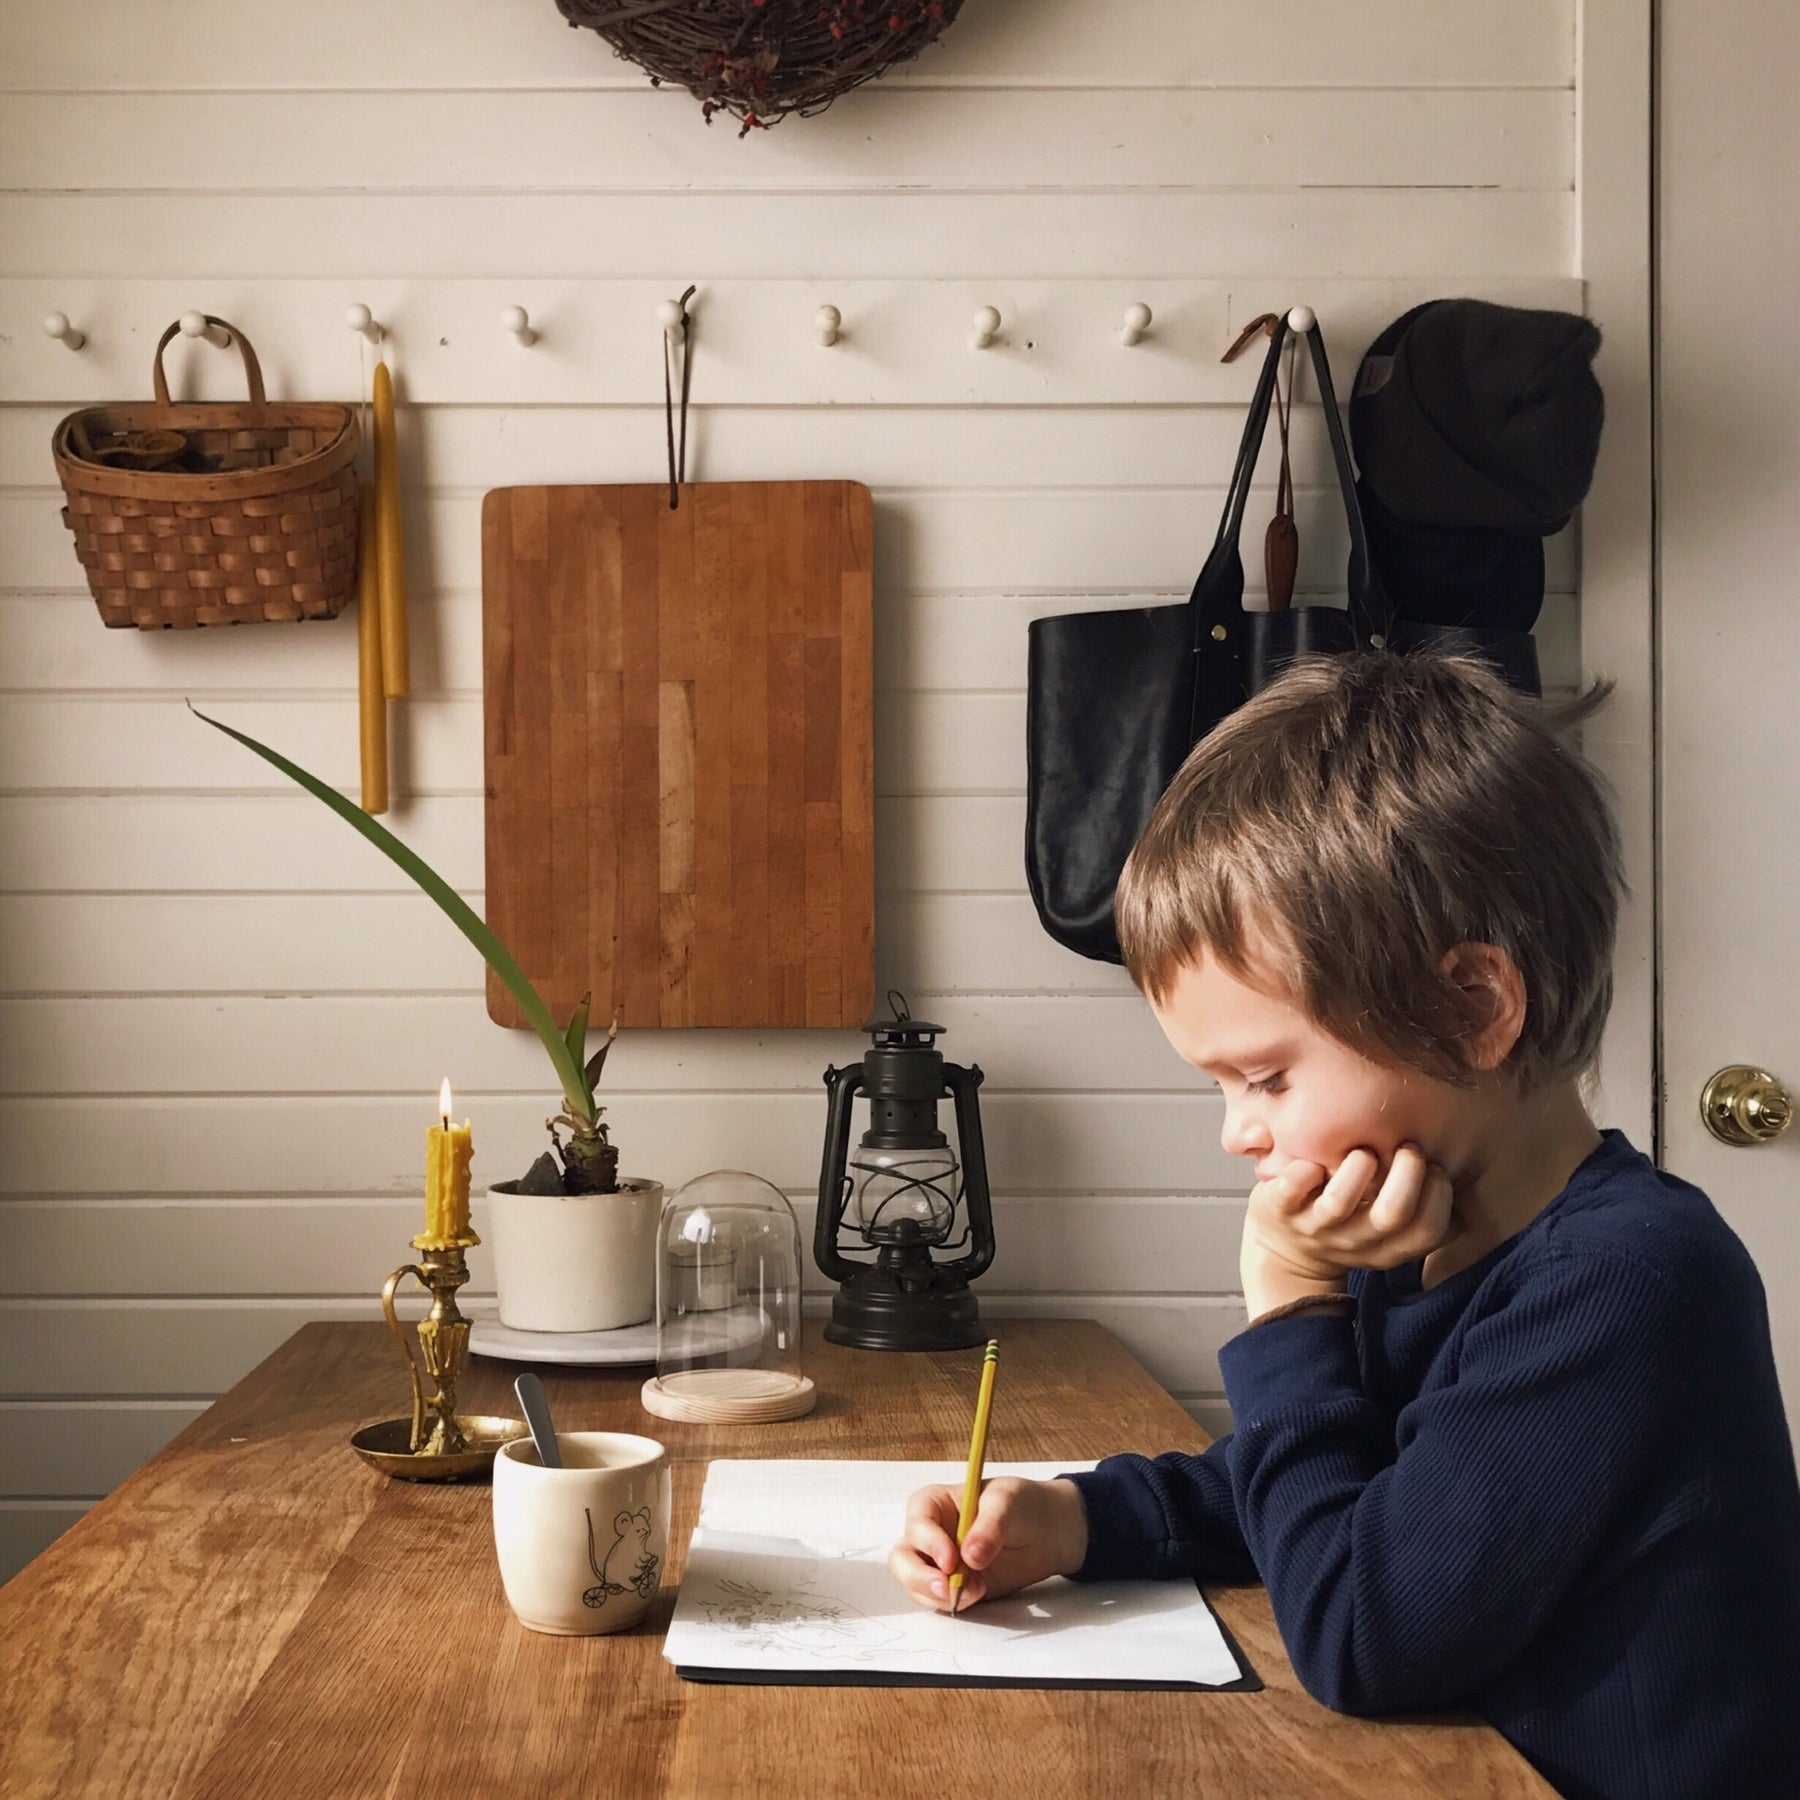 Writing little notes back and forth with children can be a great way to help them learn and grow in how they communicate, whether it's through pictures or words